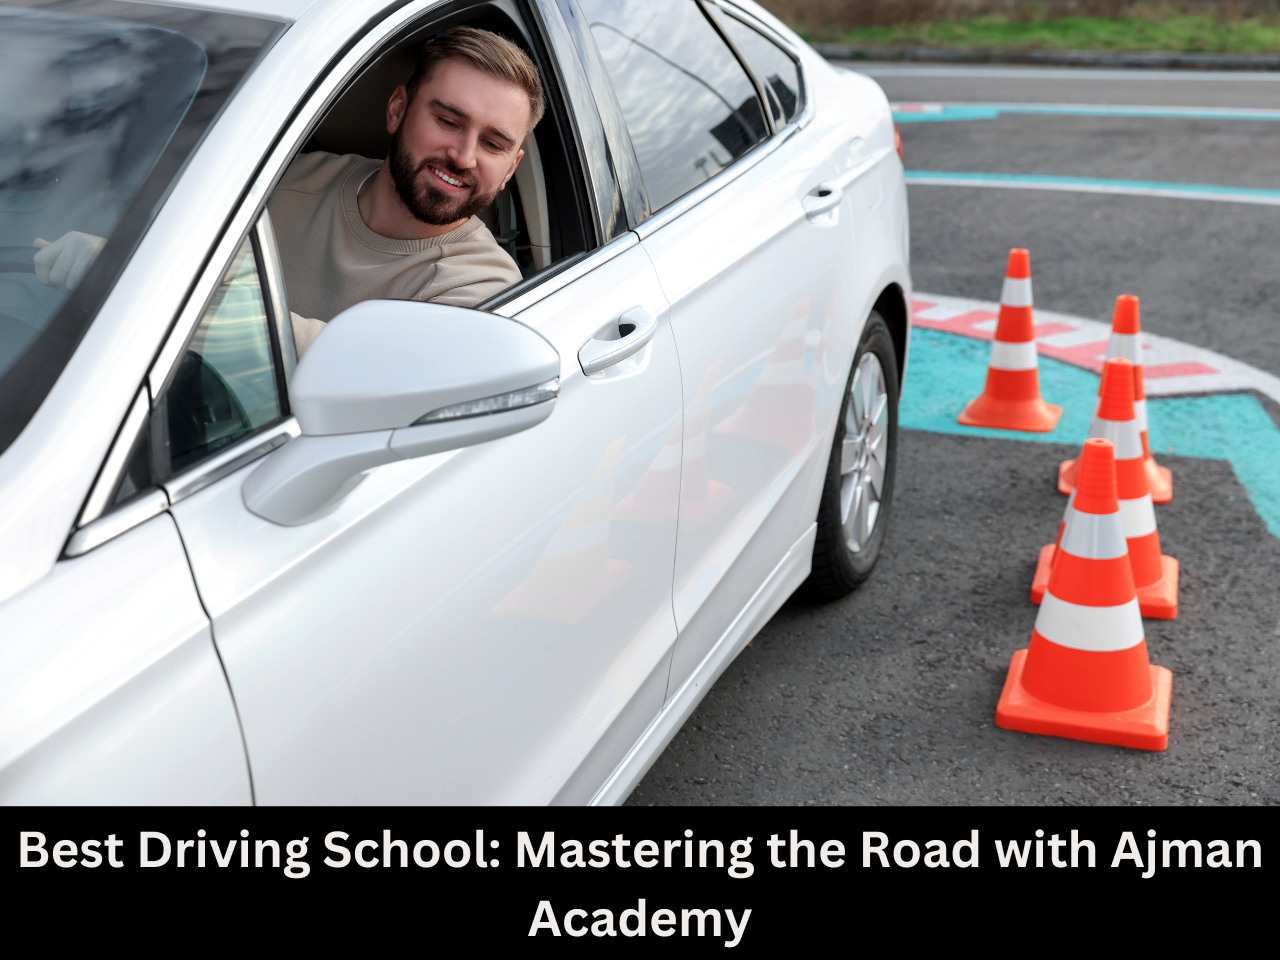 Best Driving School: Mastering the Road with Ajman Academy